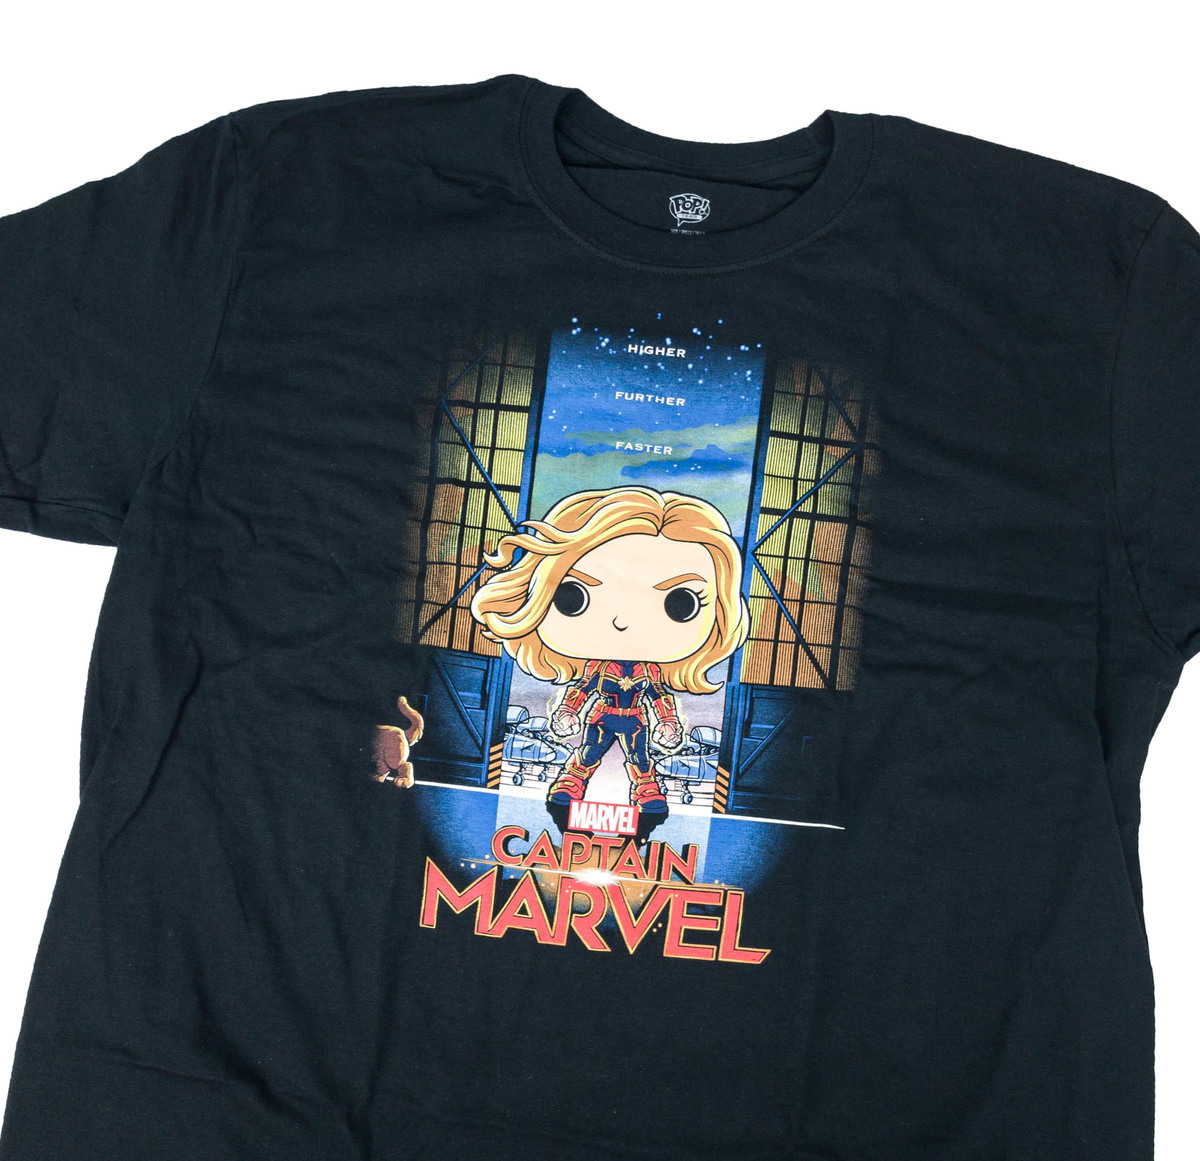 Marvel Collector Corps Captain Marvel Poster POP Tee T-Shirt - New